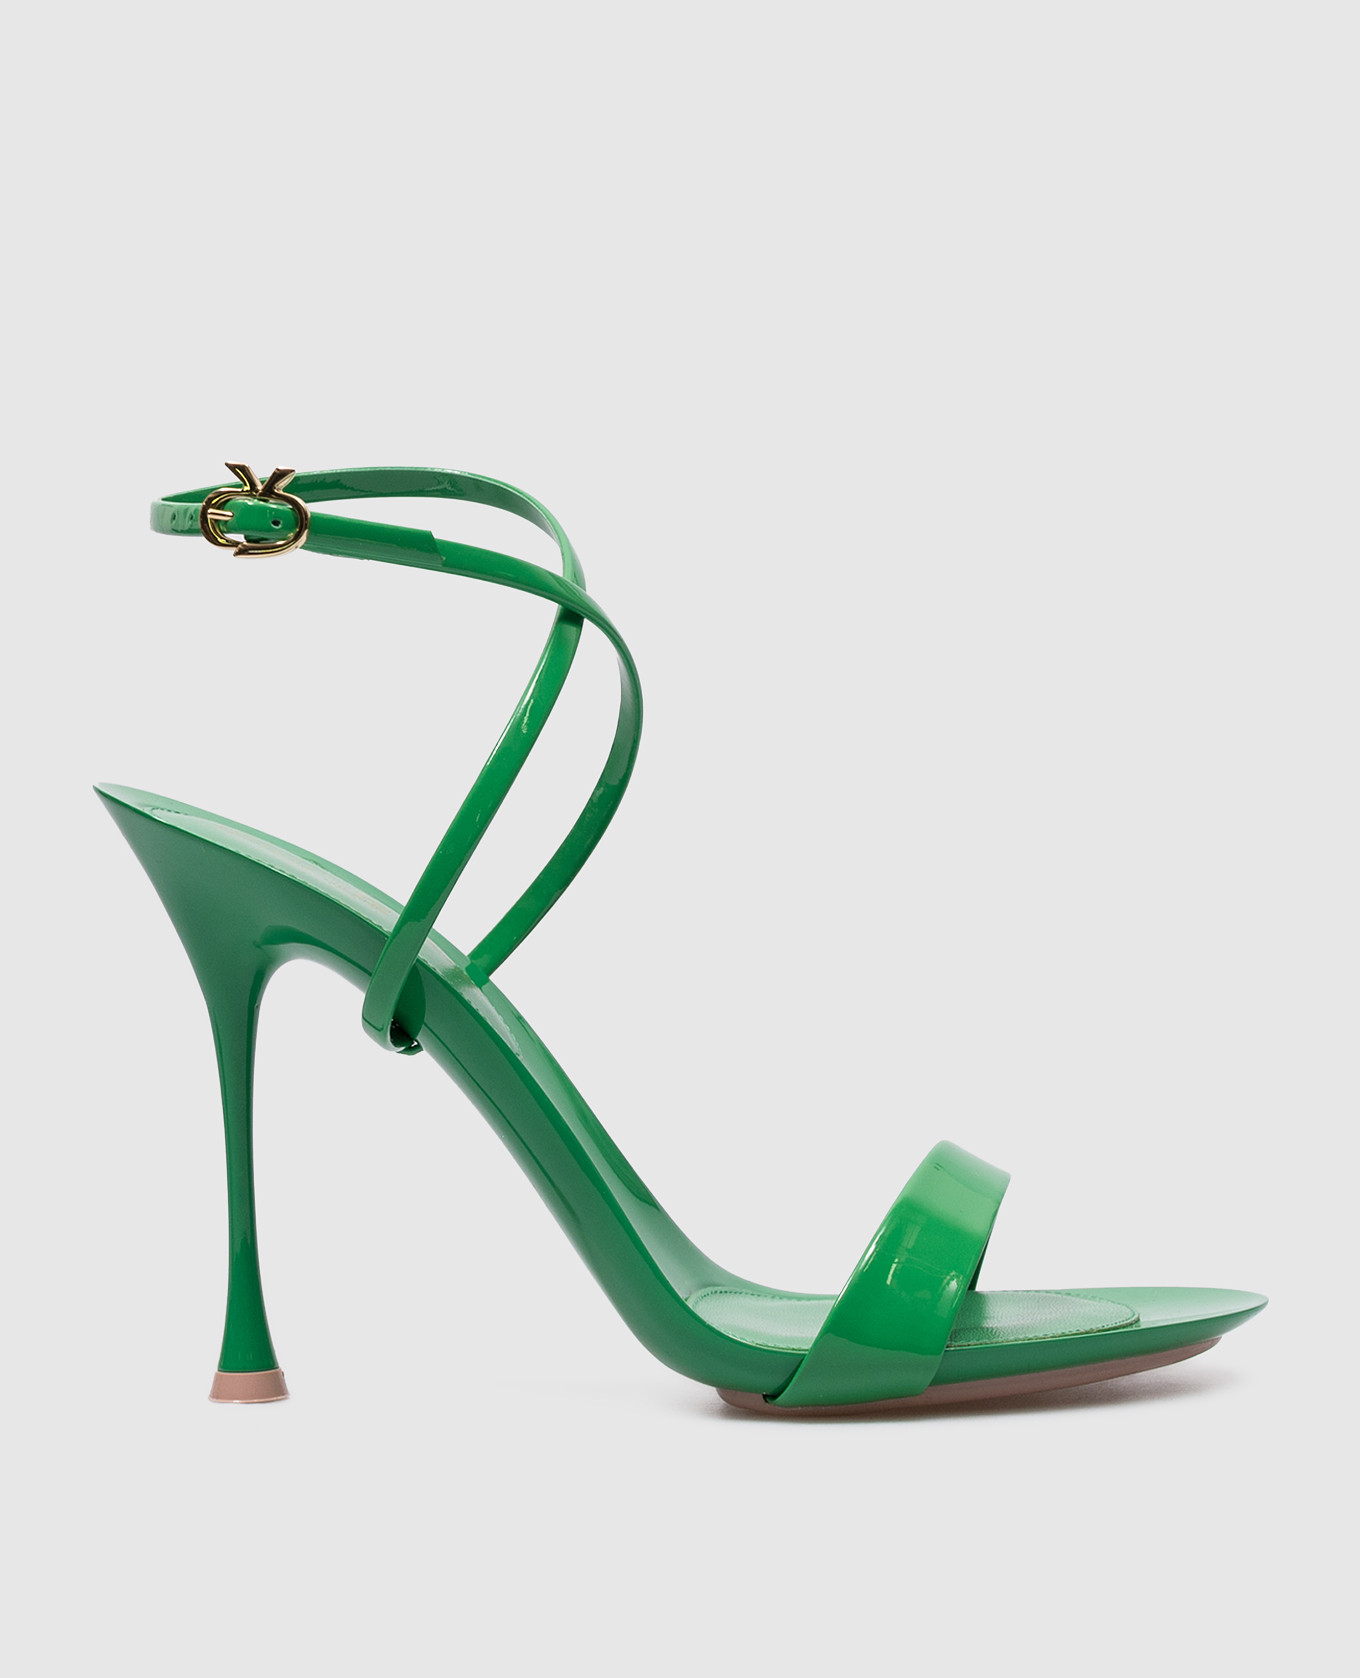 Spice green patent leather sandals